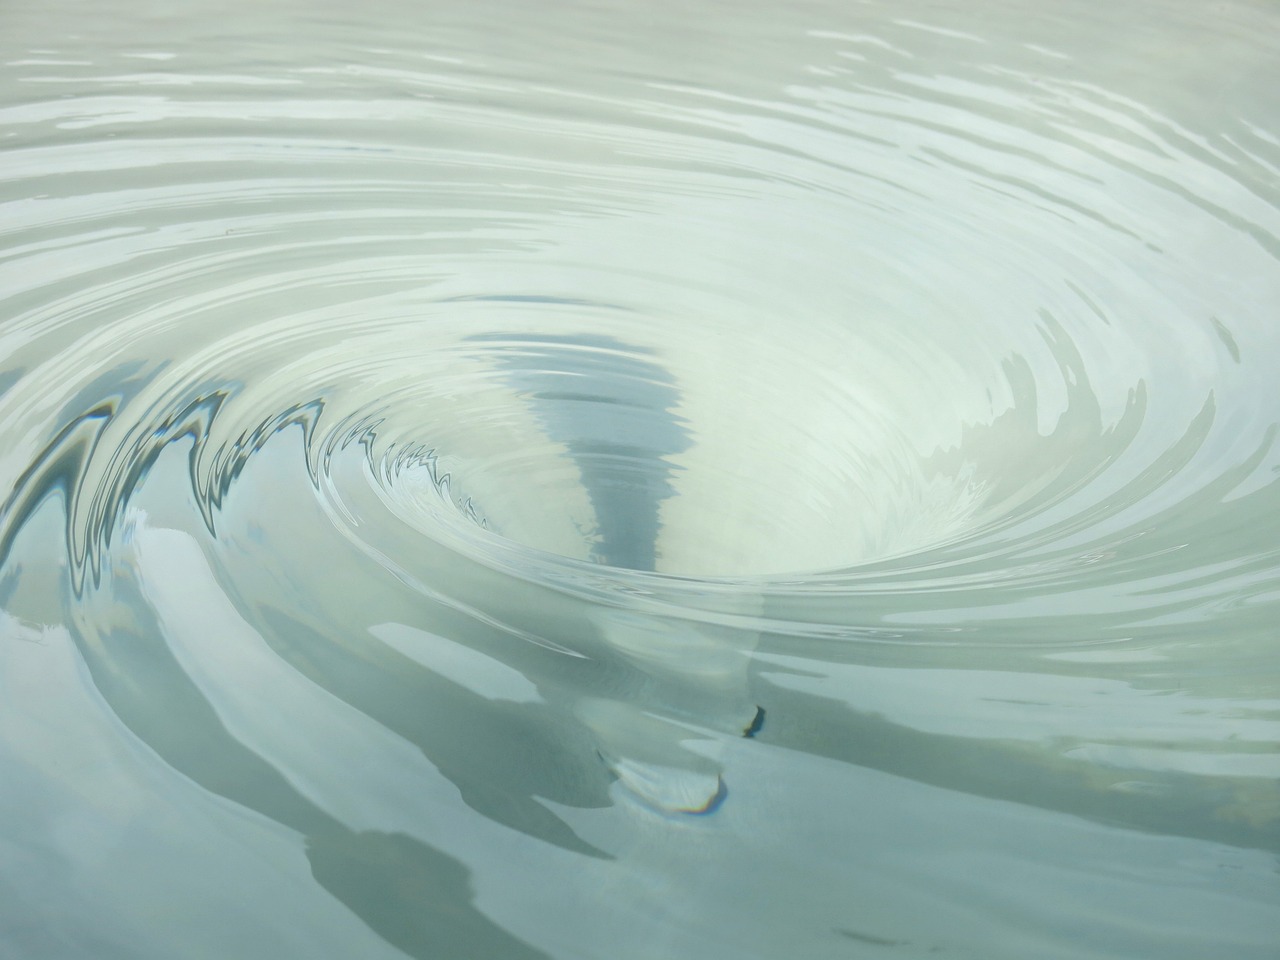 a close up of a wave in a body of water, a picture, inspired by Lucio Fontana, shutterstock, pulled into the spiral vortex, porcelain forcefield, muted water reflections, benjamin vnuk